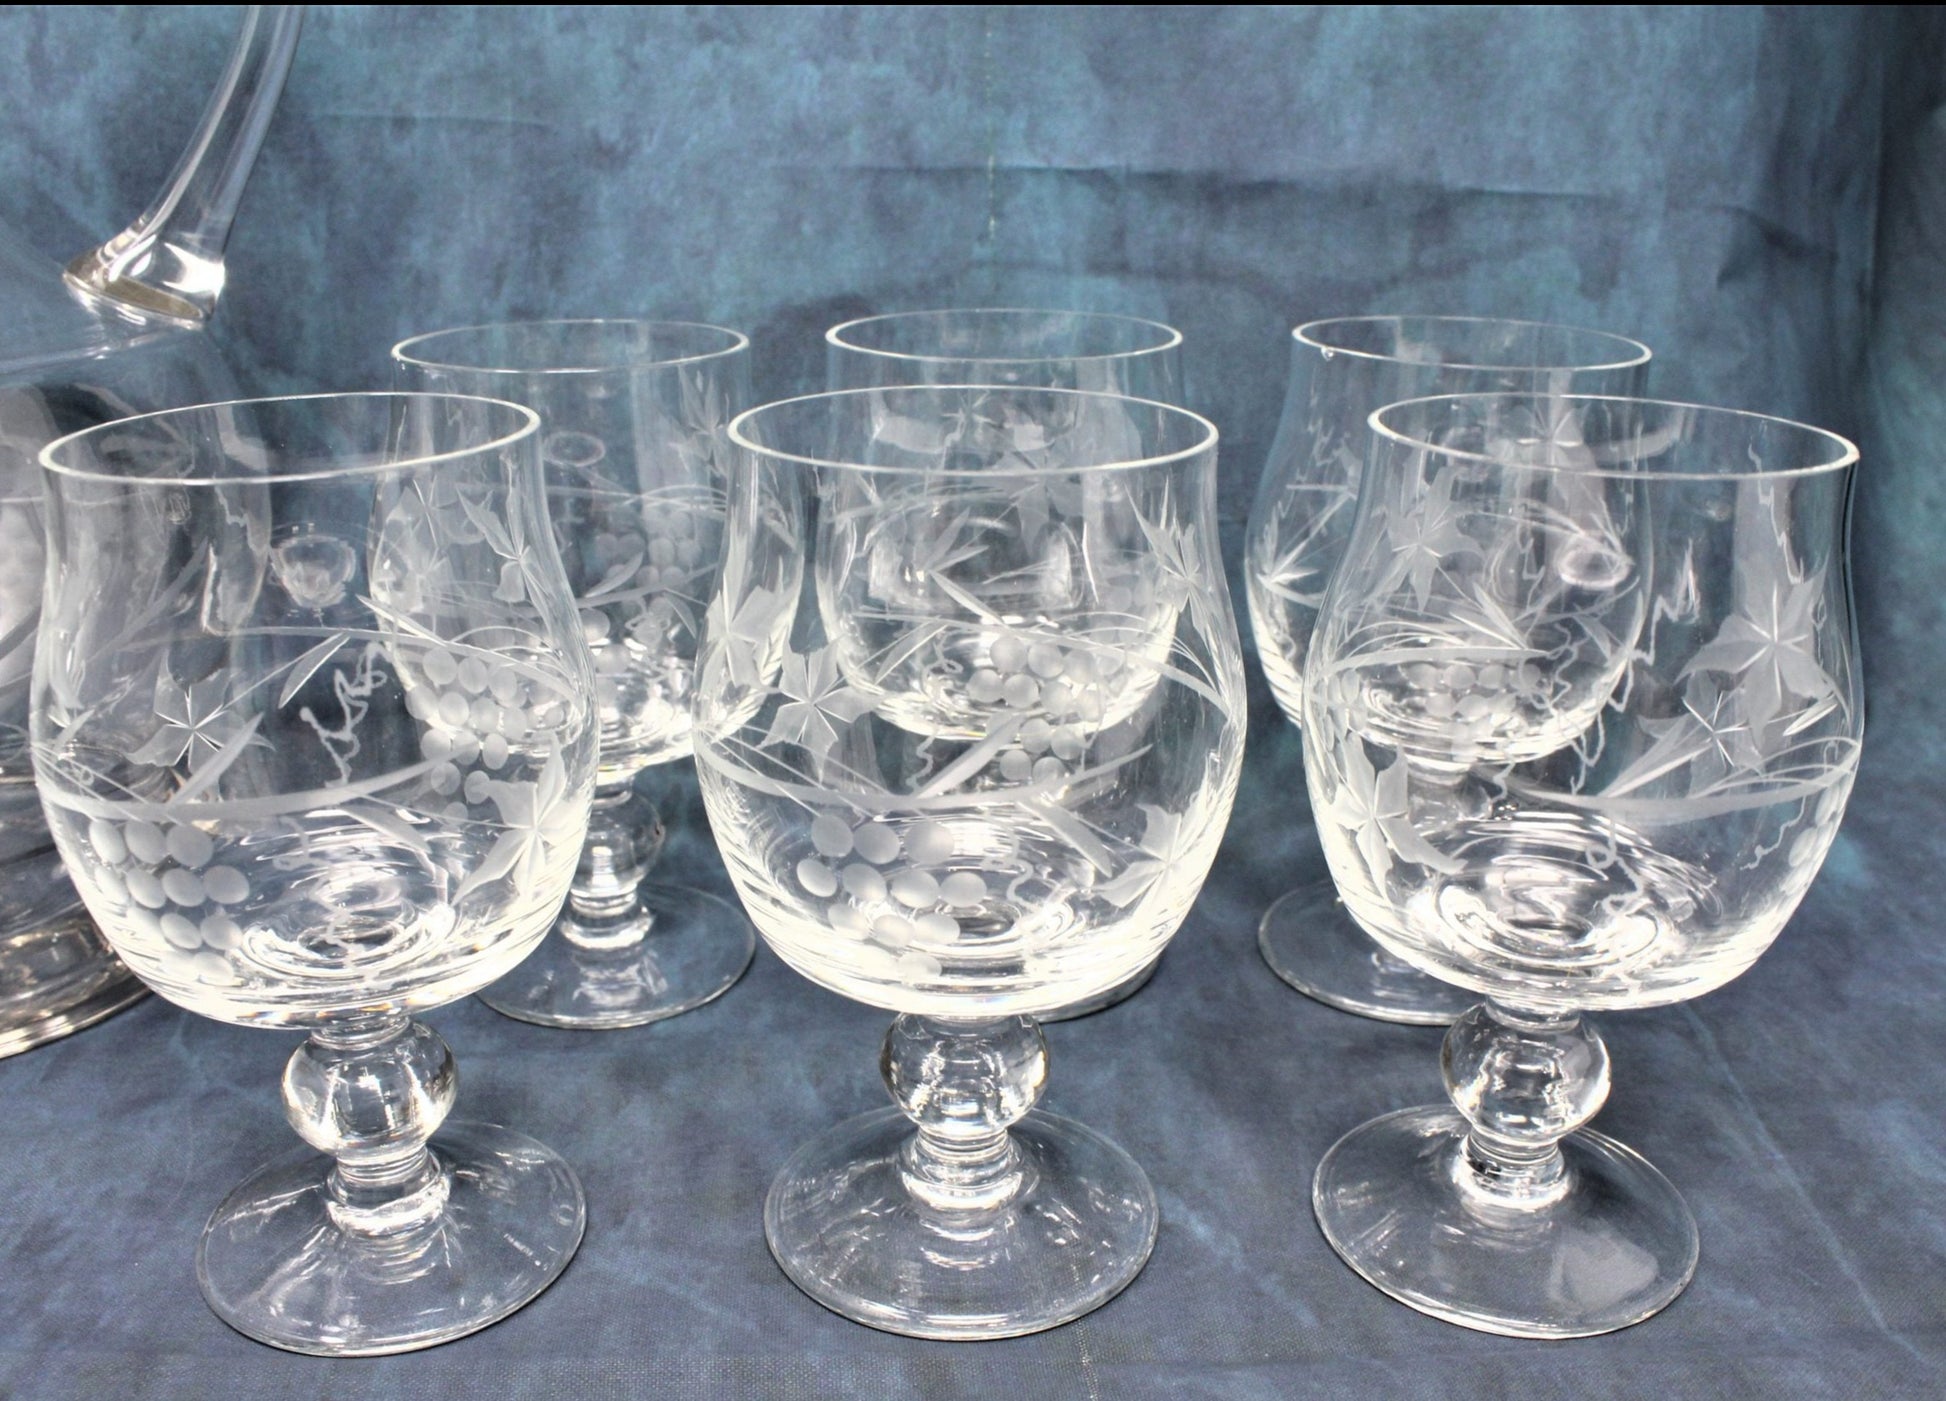 6 stemmed etched glasses from Romania